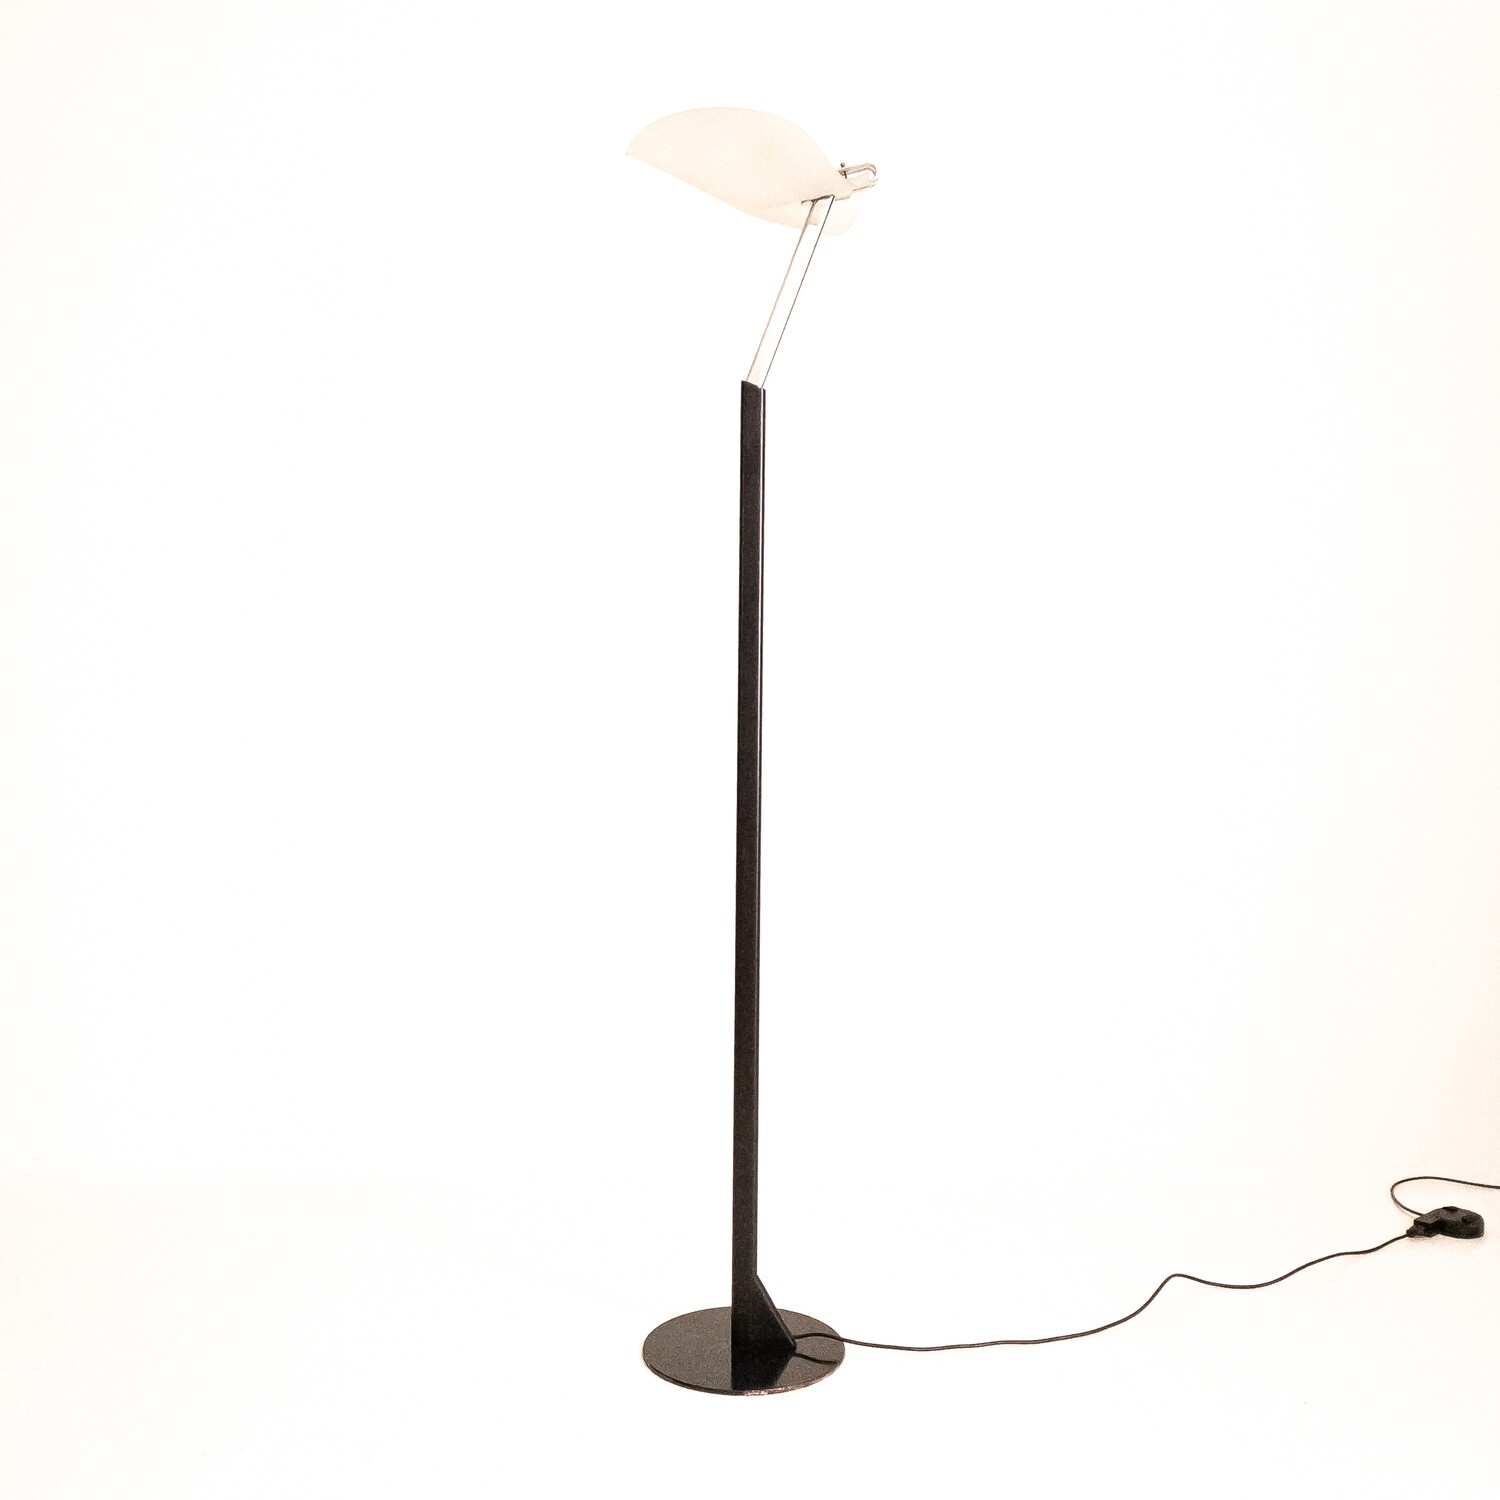 Floor lamp with leaf shade